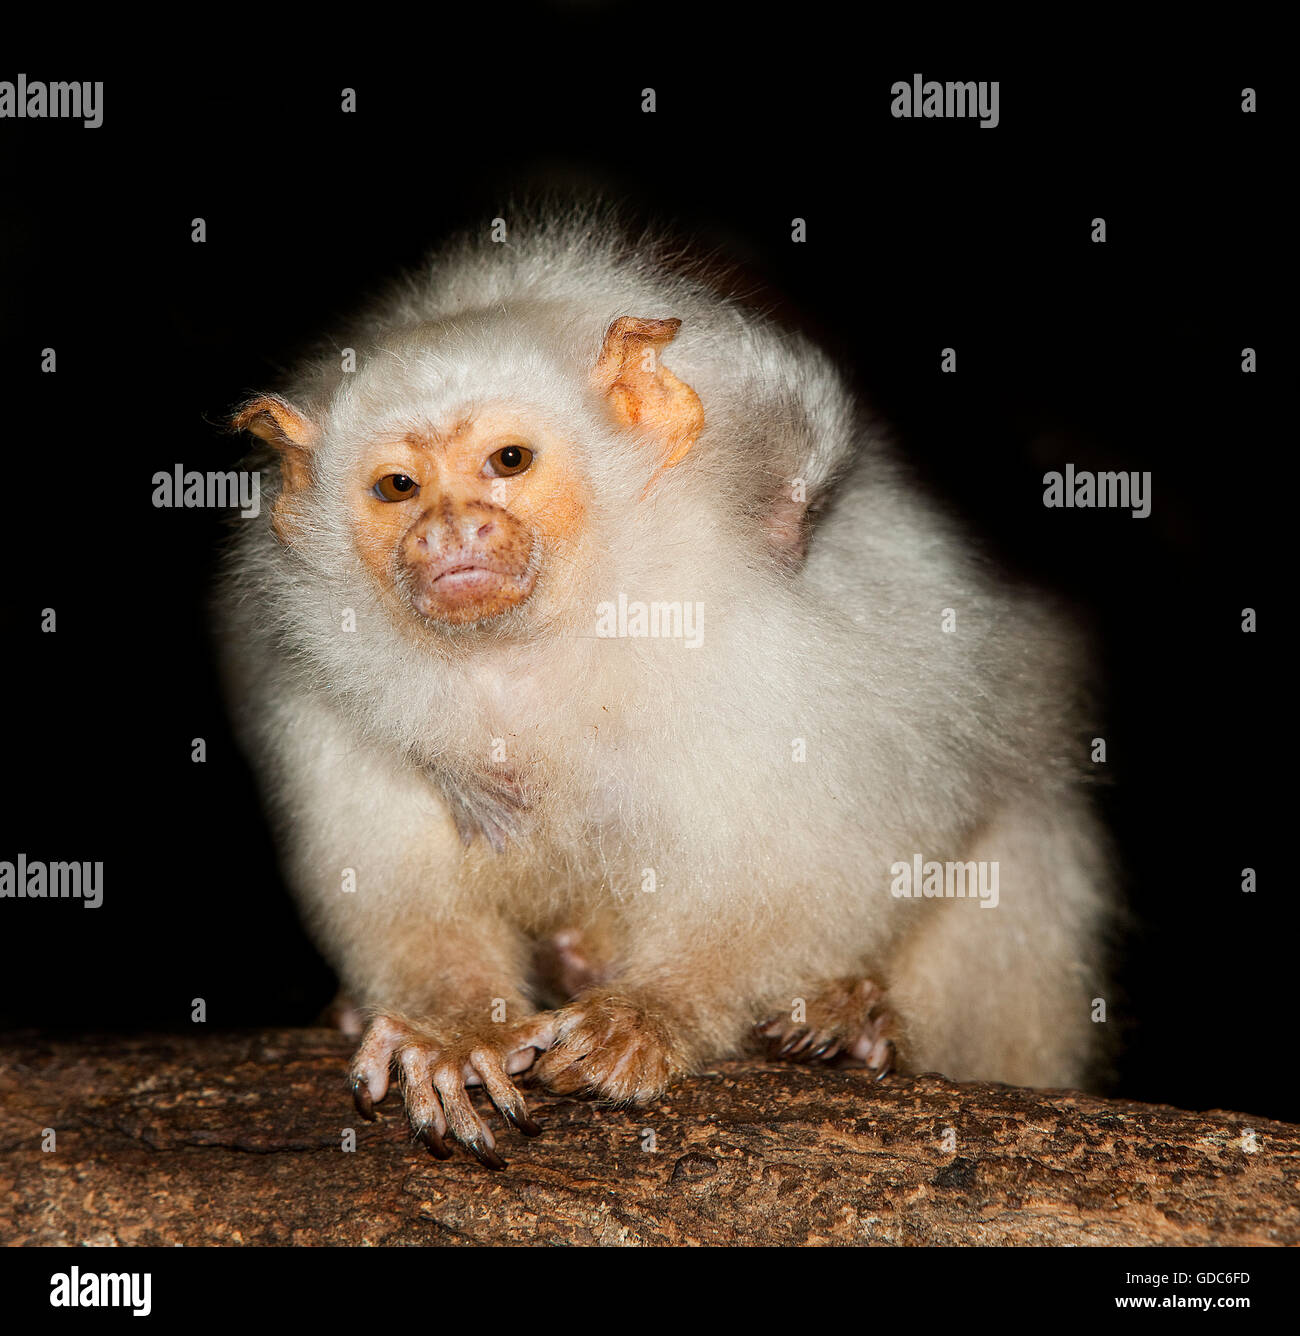 SILVERY MARMOSET FEMALE mico argentatus CARRYING A BABY ON ITS BACK Stock Photo